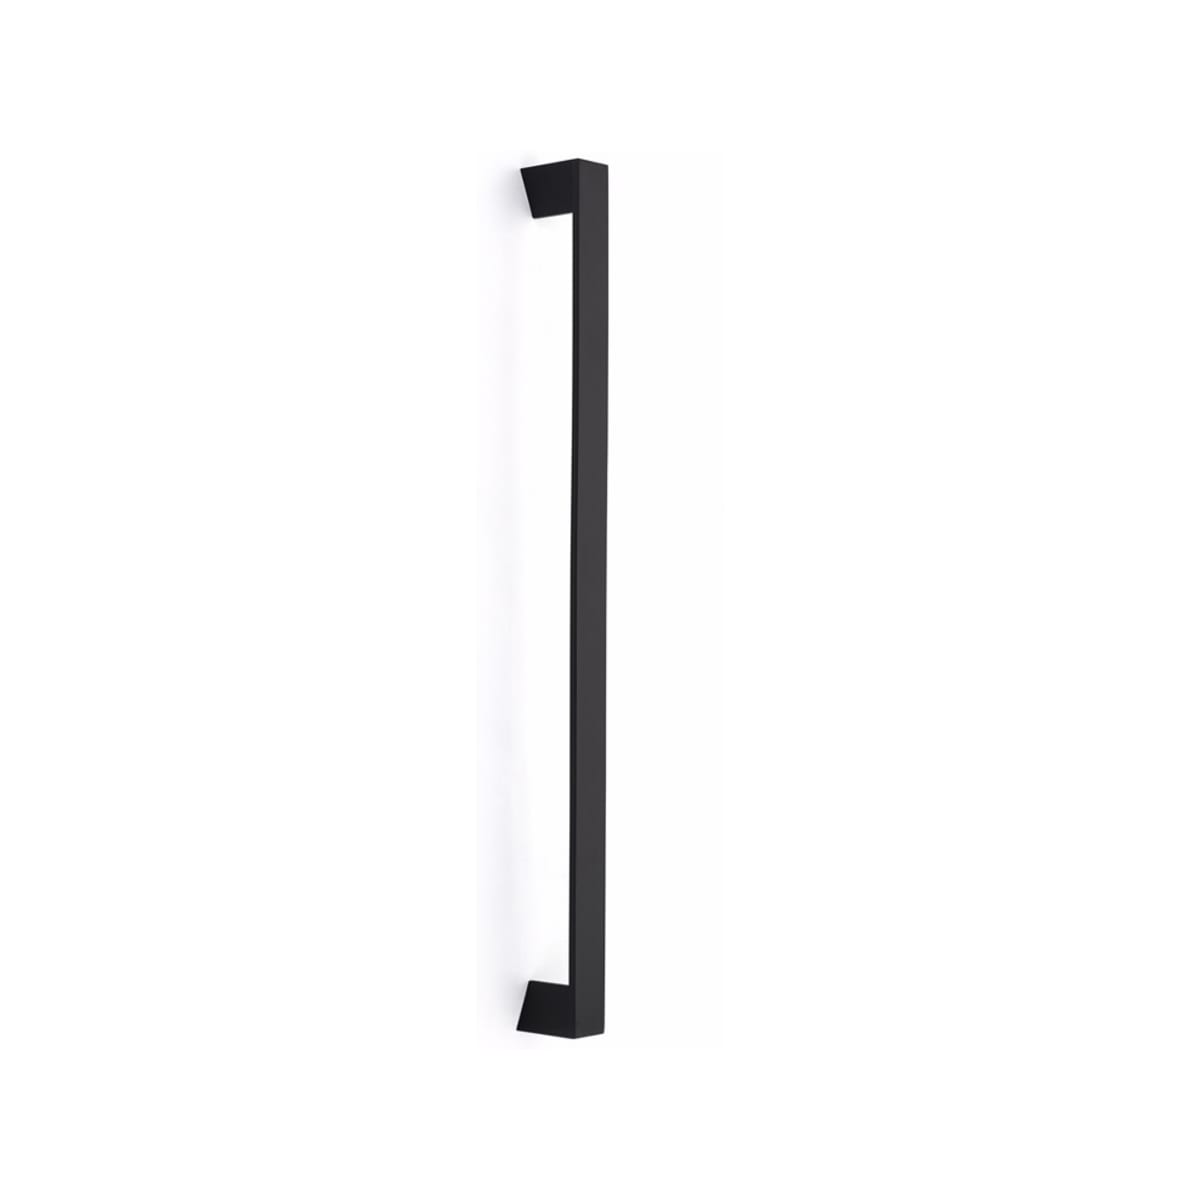 CS86445US19 - Concealed Surface Mount - Trinity Appliance Pull - 18" - Flat Black